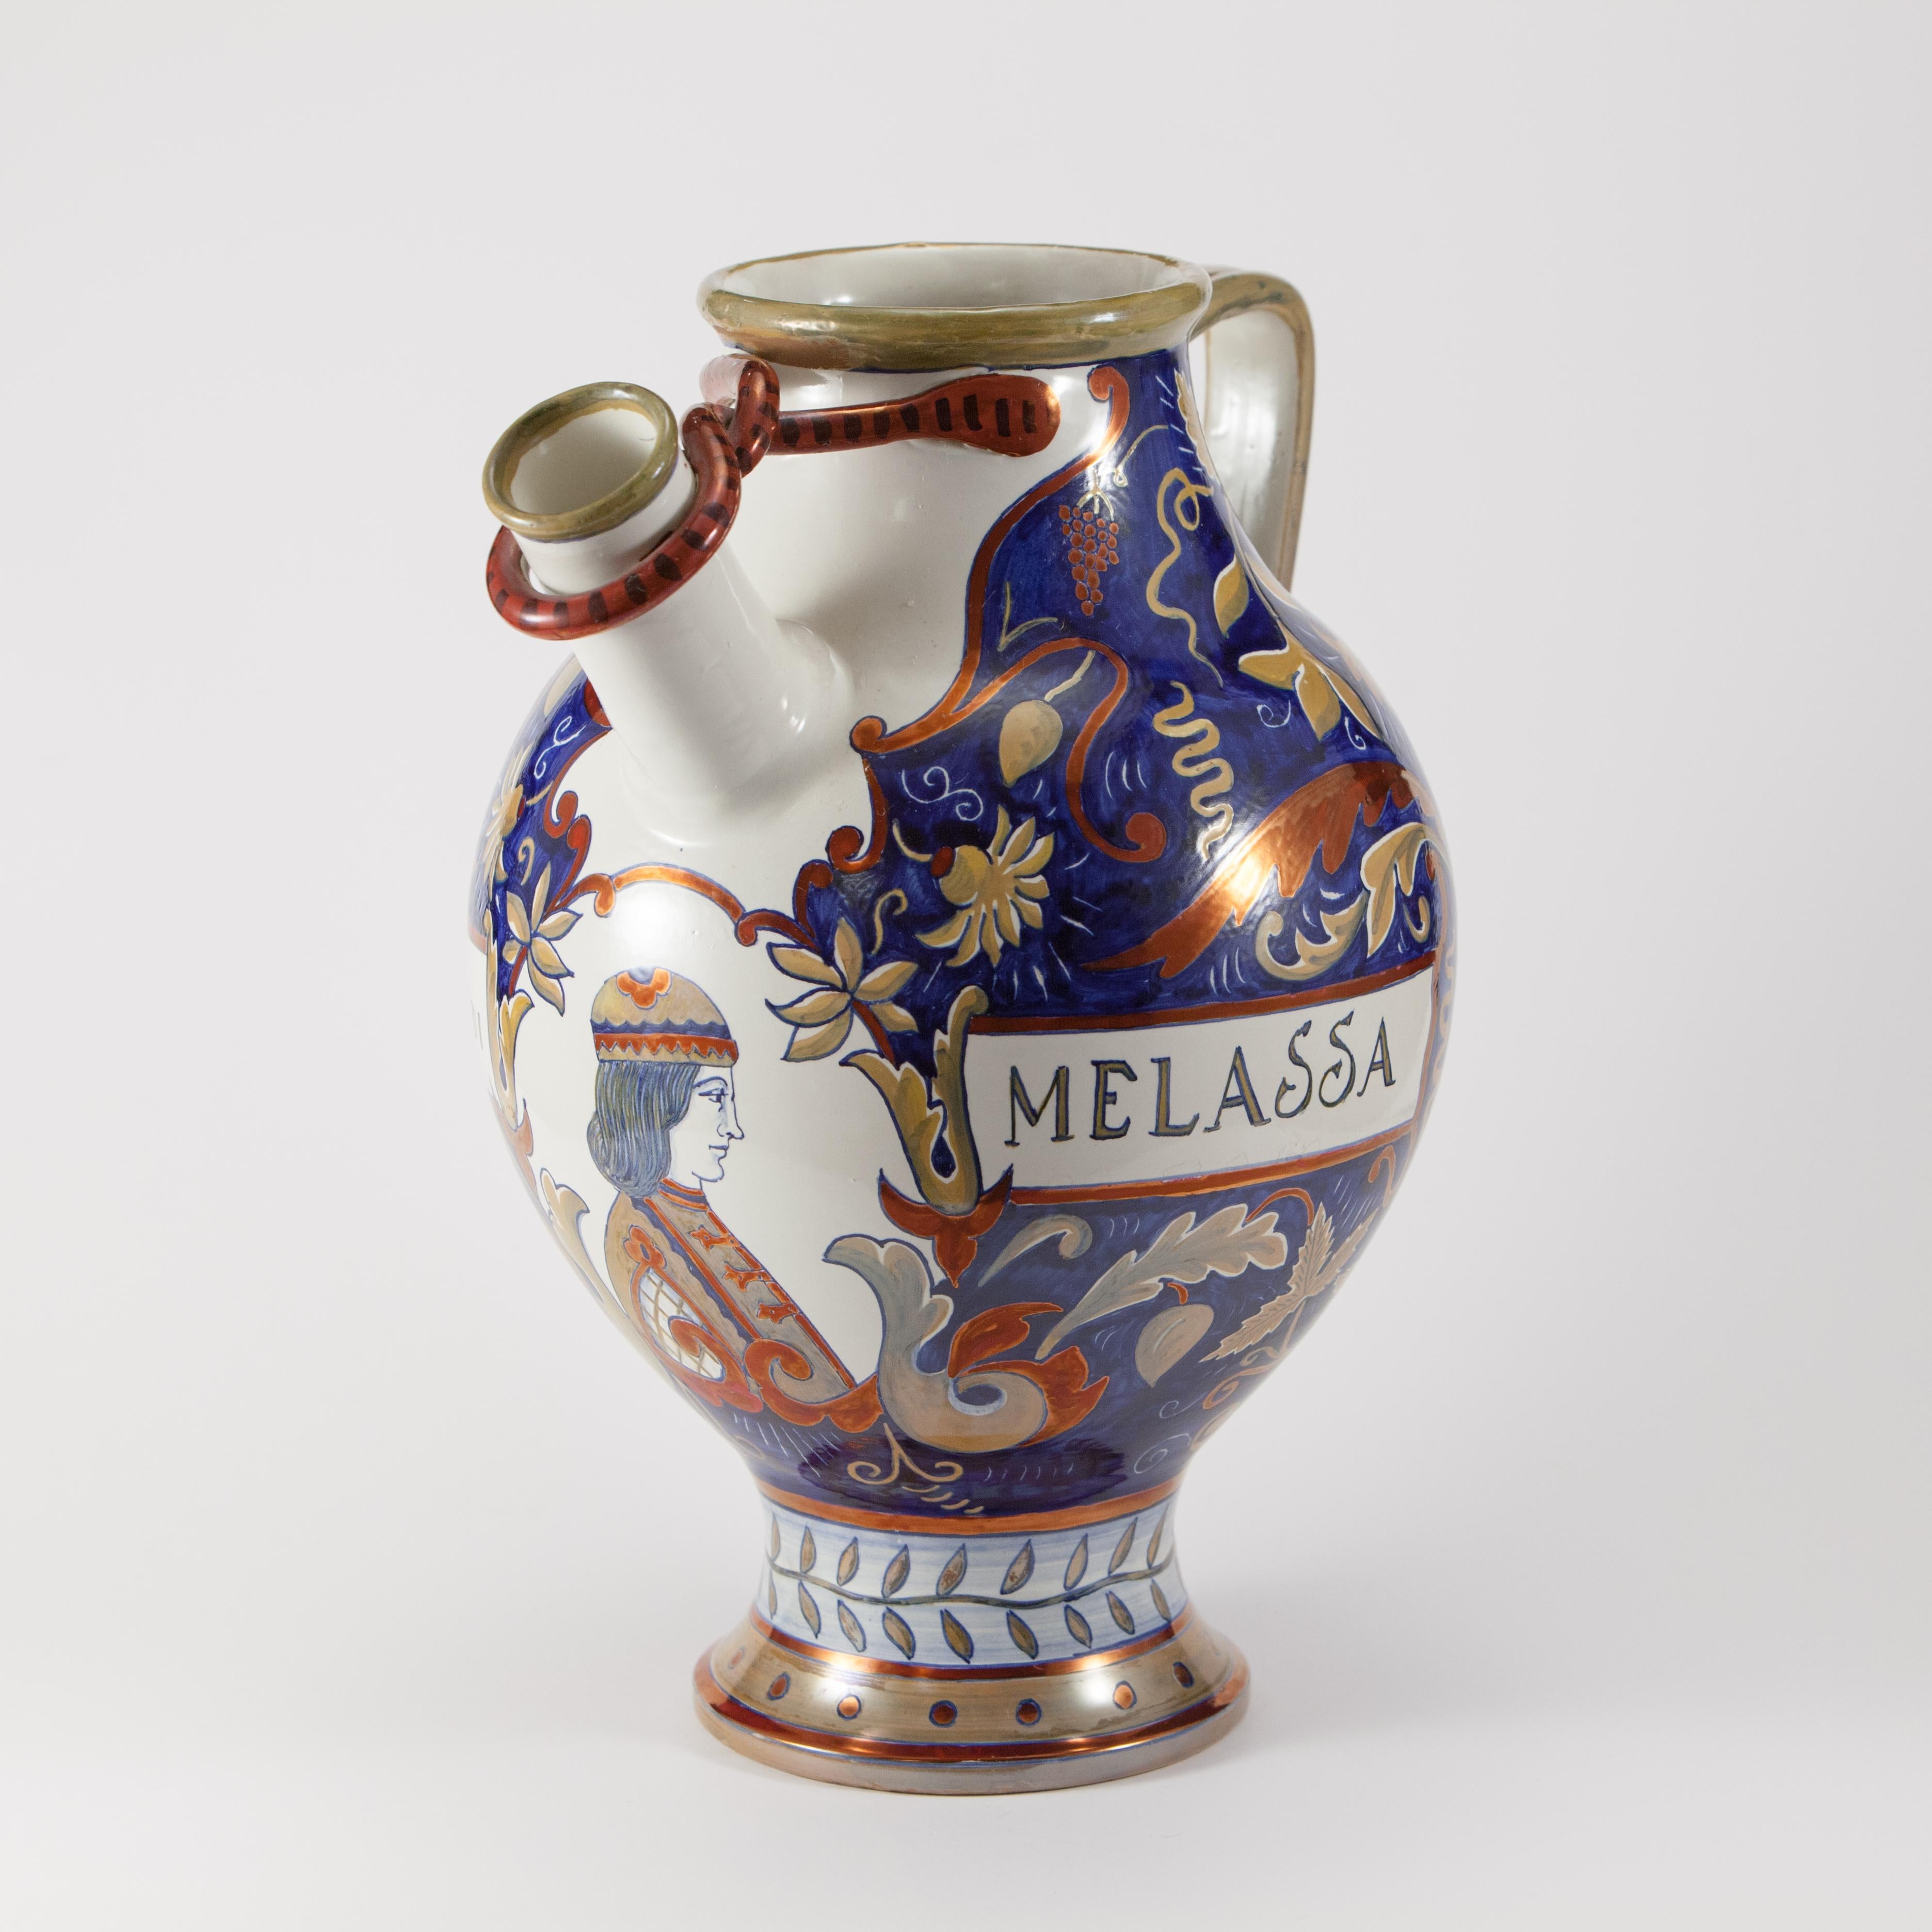 Majolica pourer with handle, decorated with metallic luster in the style of Renaissance majolica in shades of blue, yellow, red.
The vase houses a medallion on the front with a half-bust and the inscription 